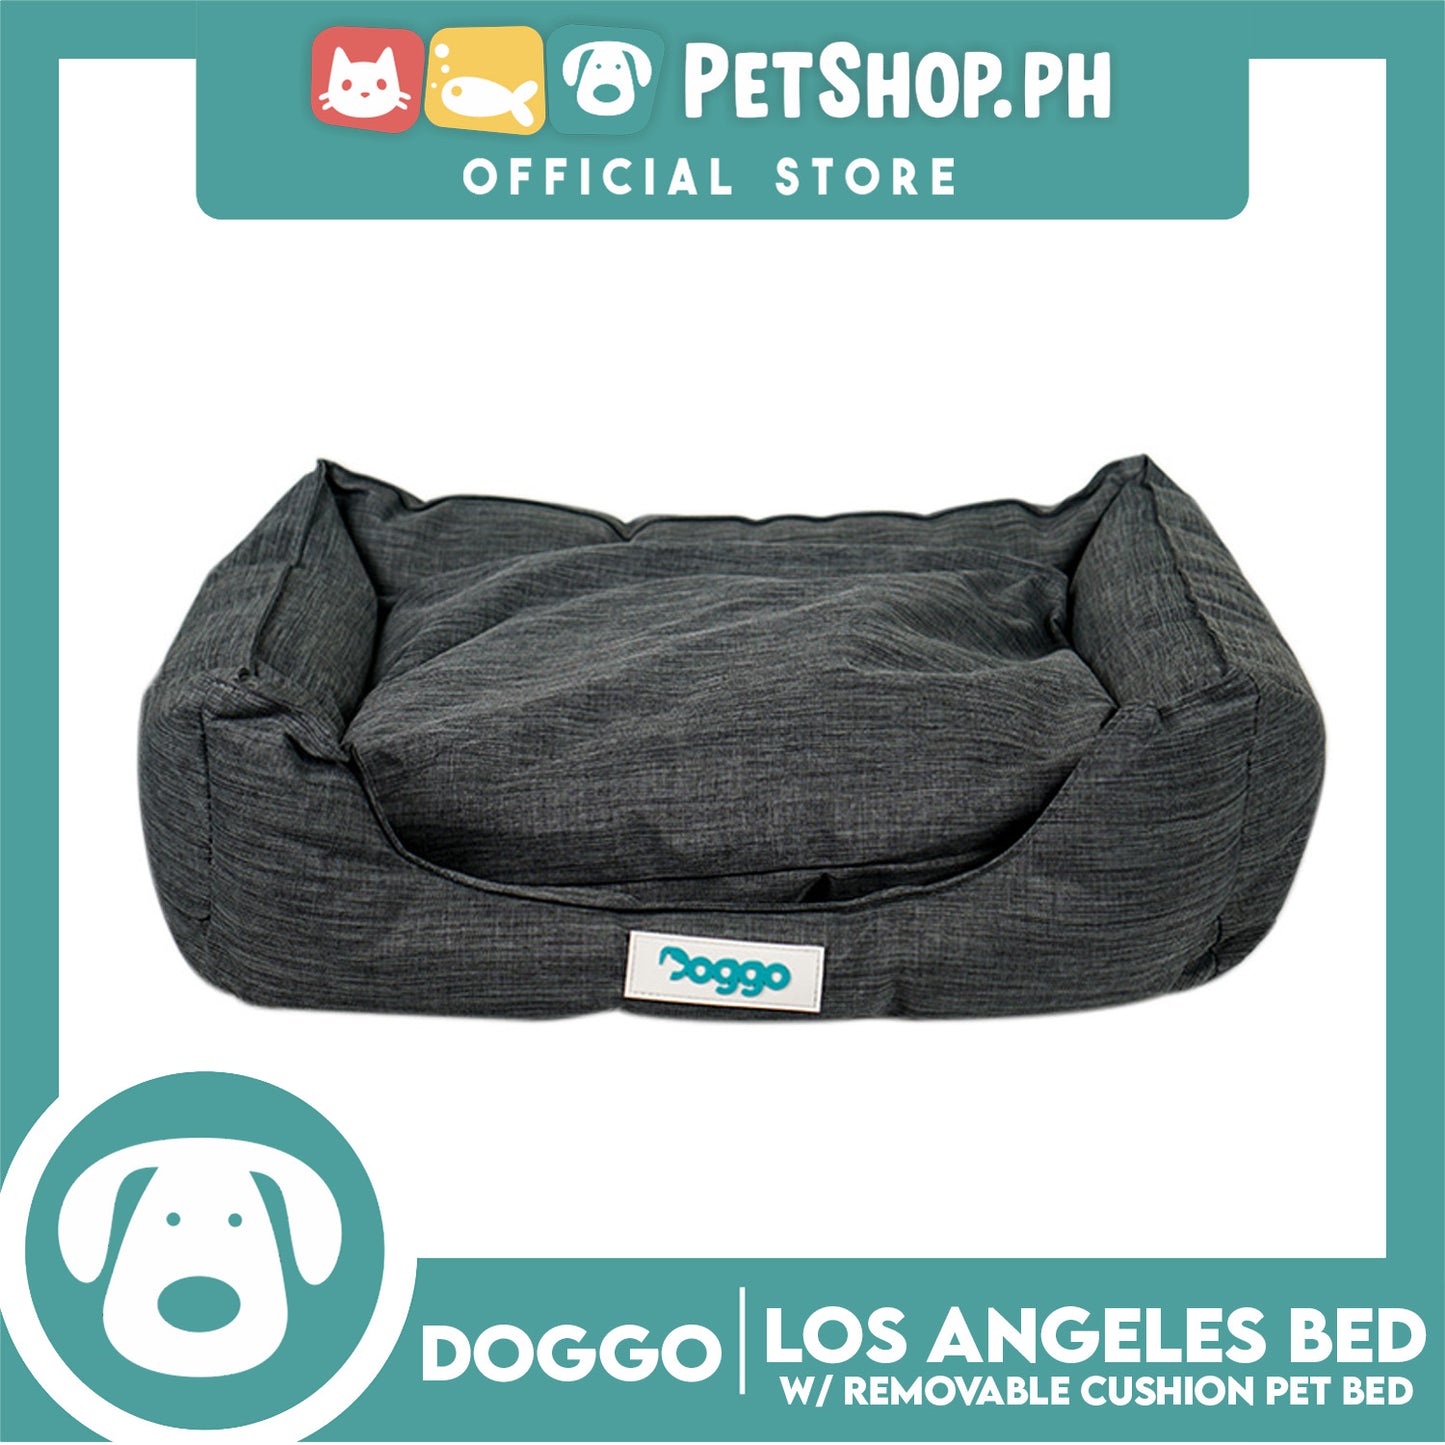 Doggo Los Angeles Bed (Large) Comfortable Pet Bed